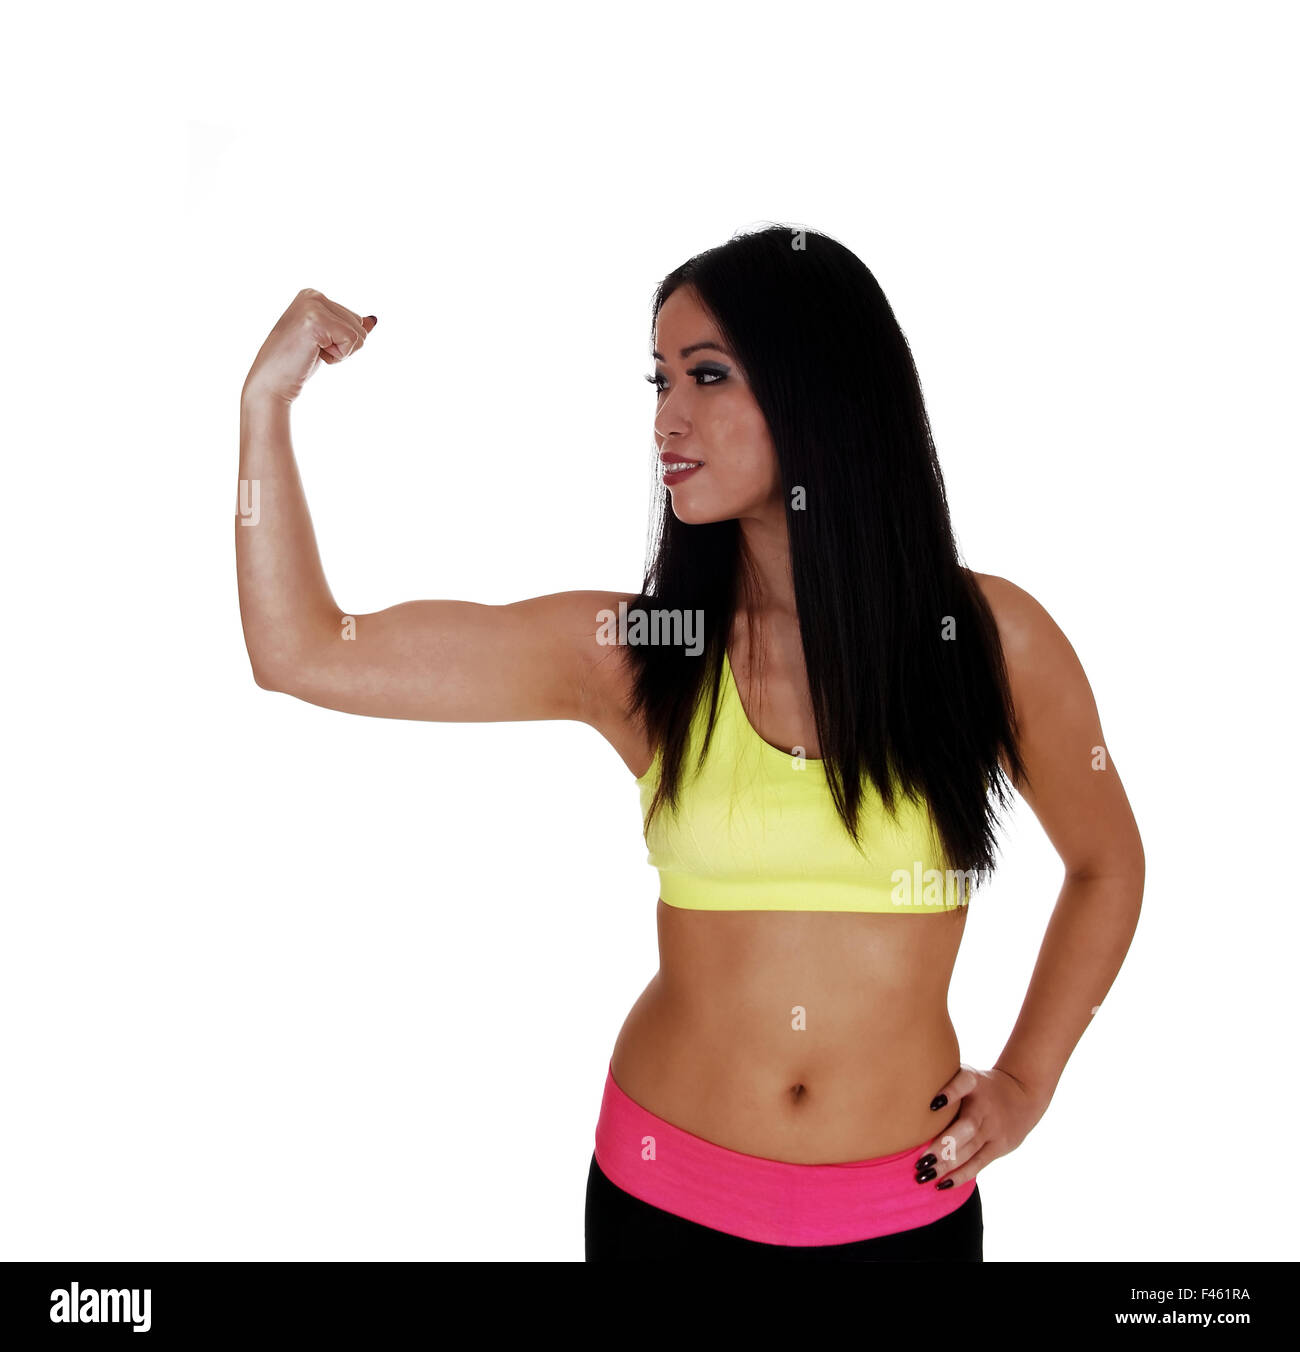 Girl showing her biceps. Stock Photo